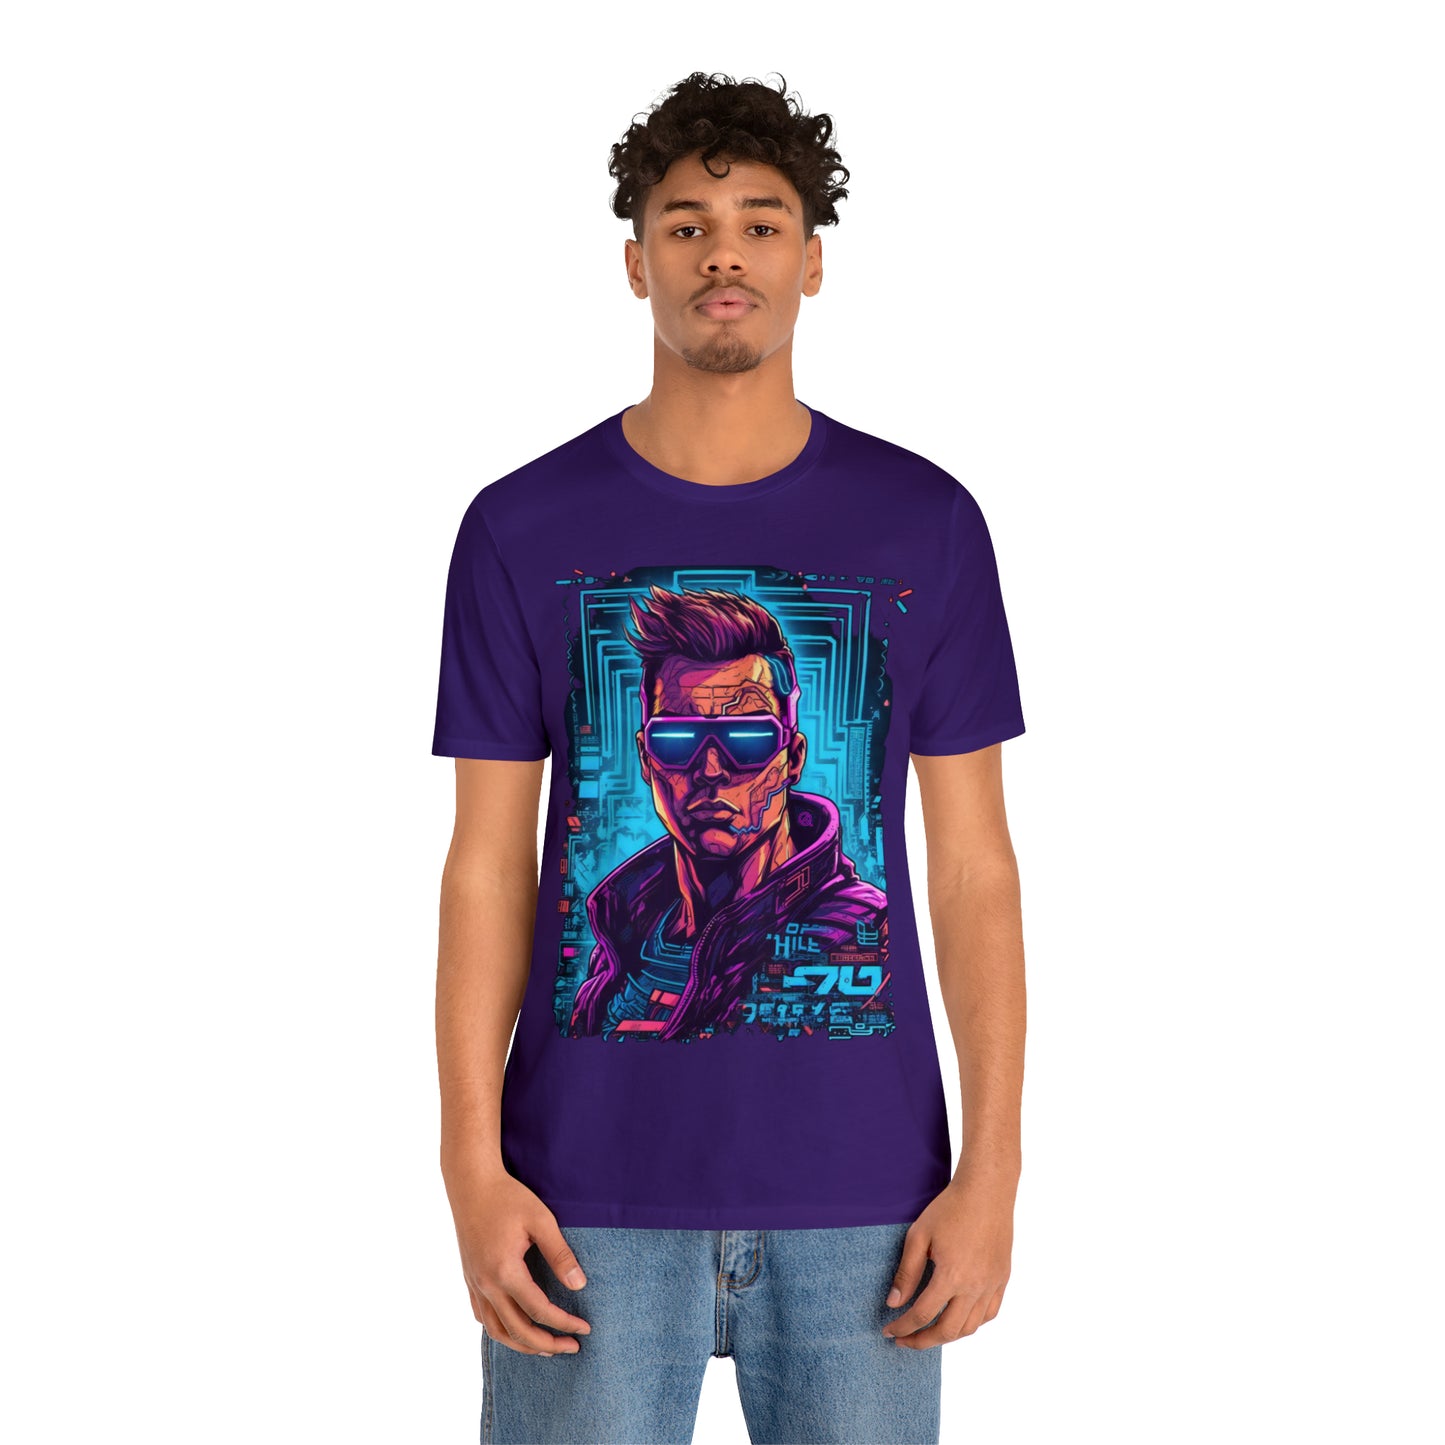 team-purple-quest-thread-tee-shirt-with-large-neon-cyber-punk-on-center